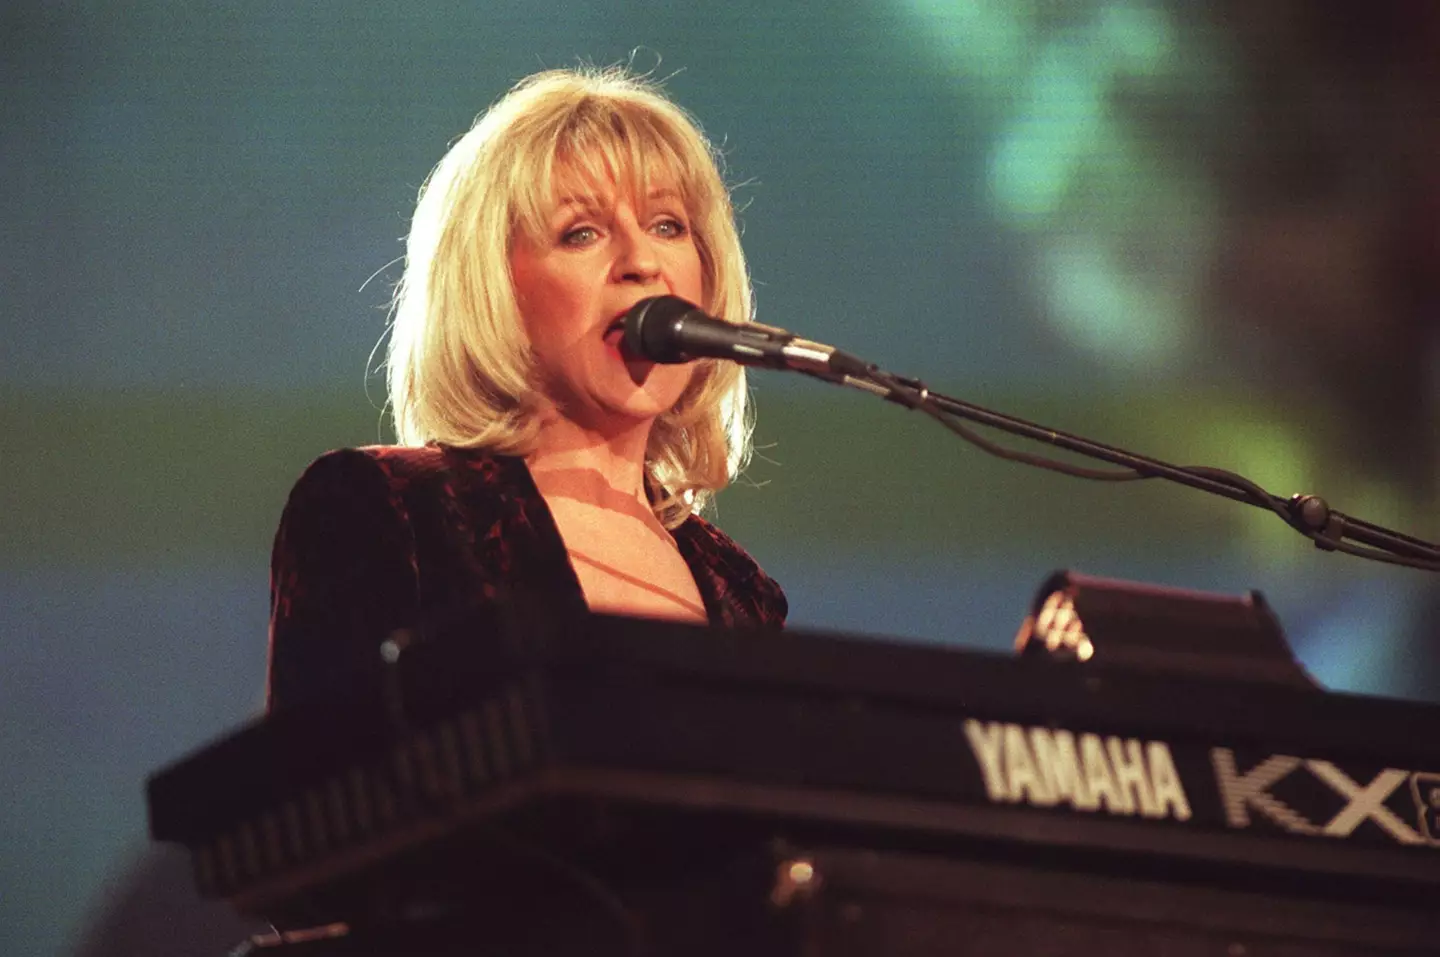 The band have paid tribute to her as a musician, and a friend.